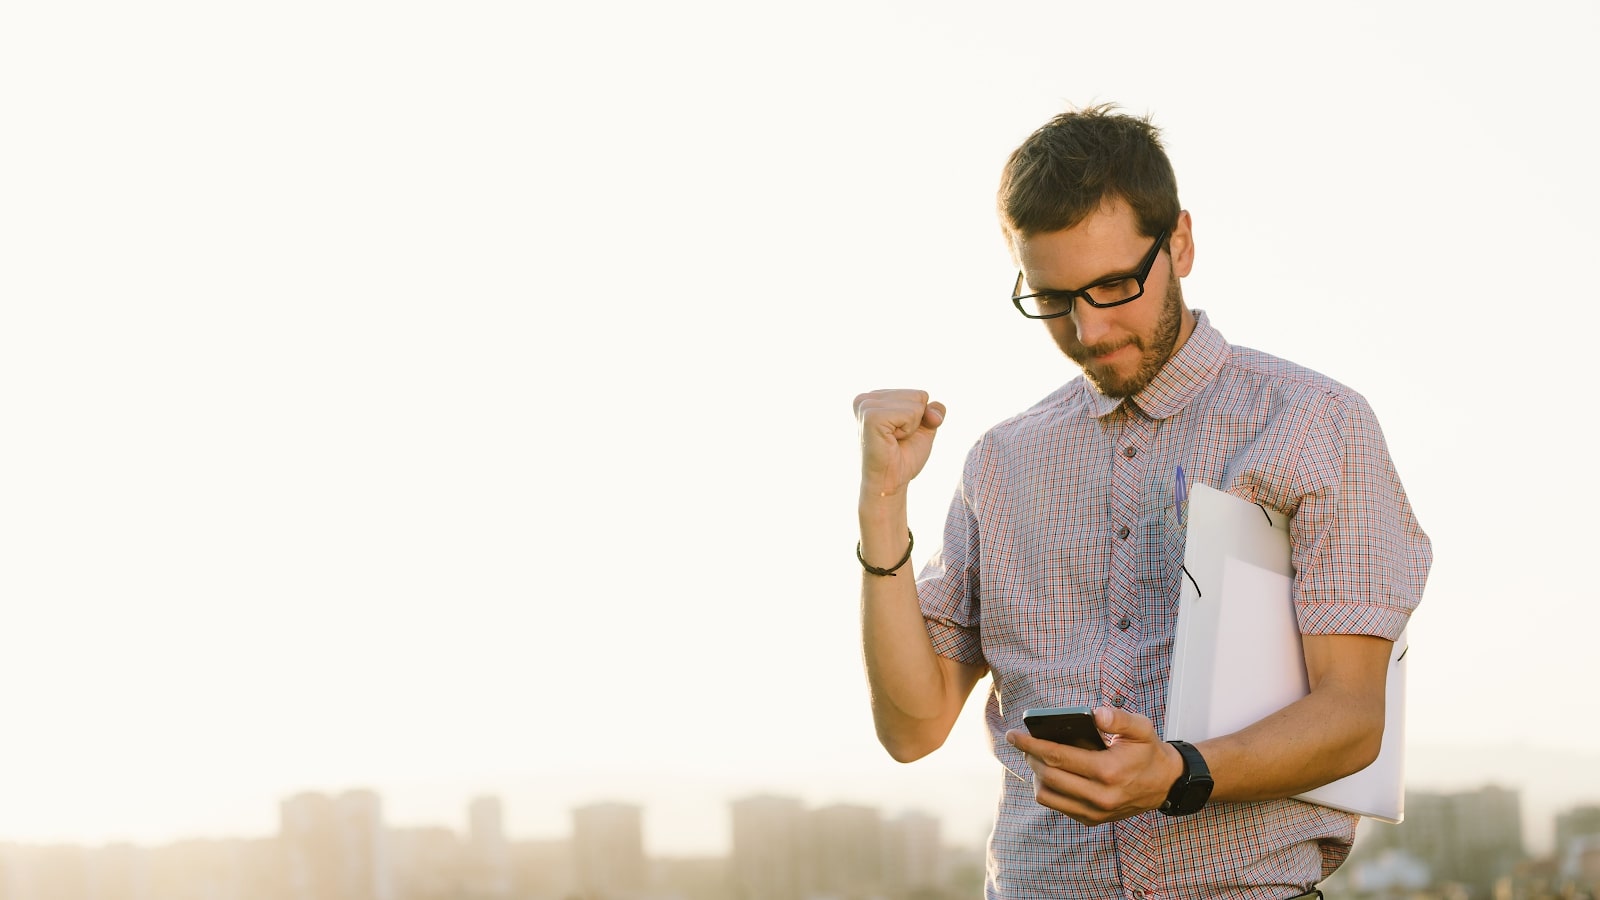 Working professional carrying documents outdoors pumps his fist while looking at a smartphone